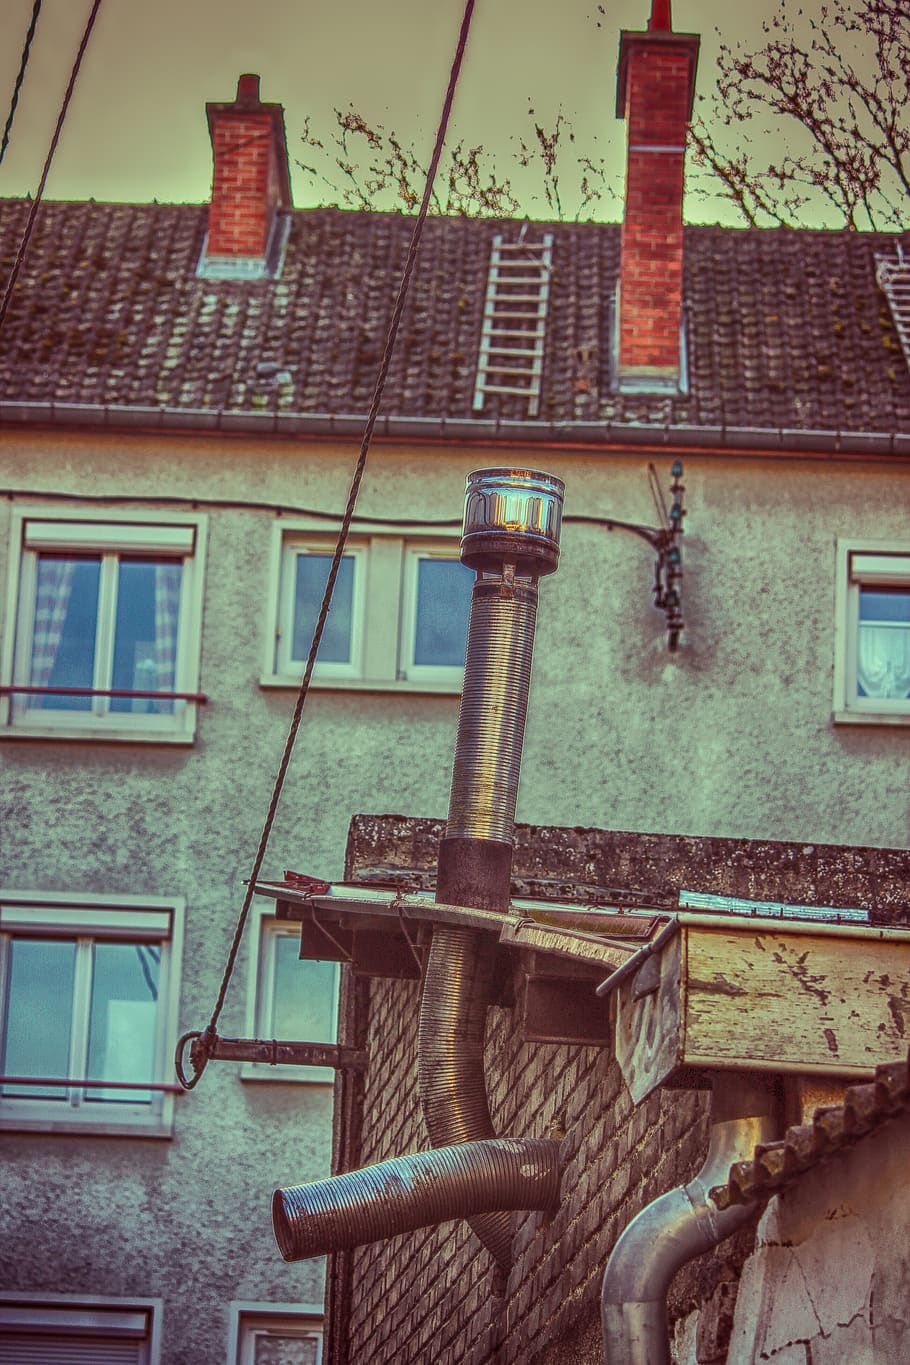 building, fireplace, pipes, evacuation, old, vintage, street, scale, ventilation, leads